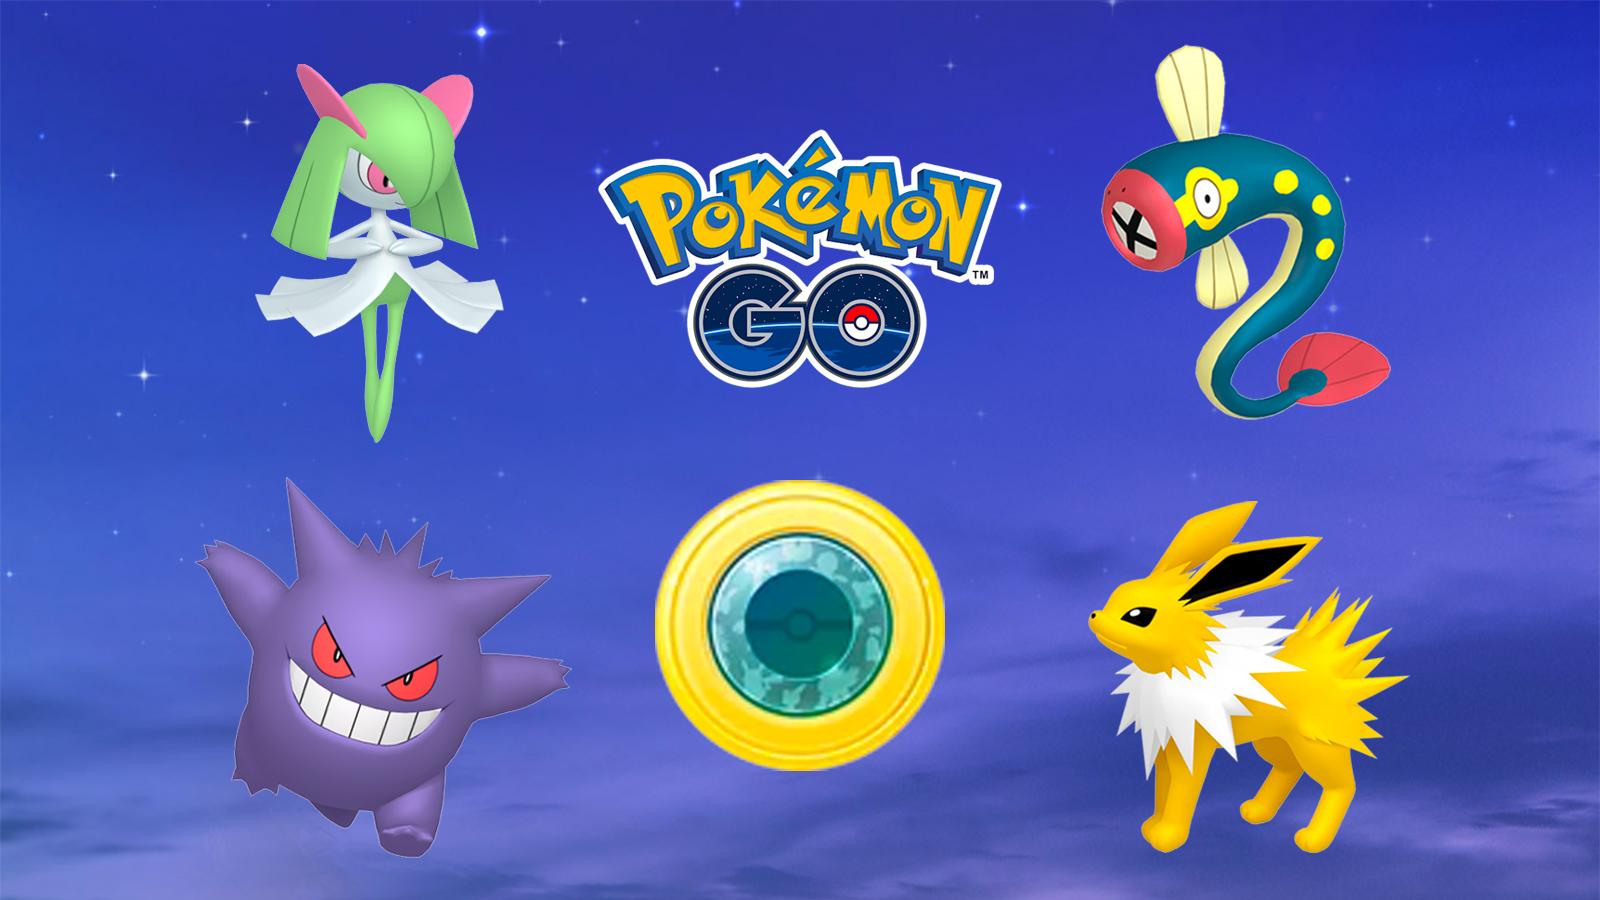 Pokemon Go Unova Stone: How to get one and which Pokemon can evolve